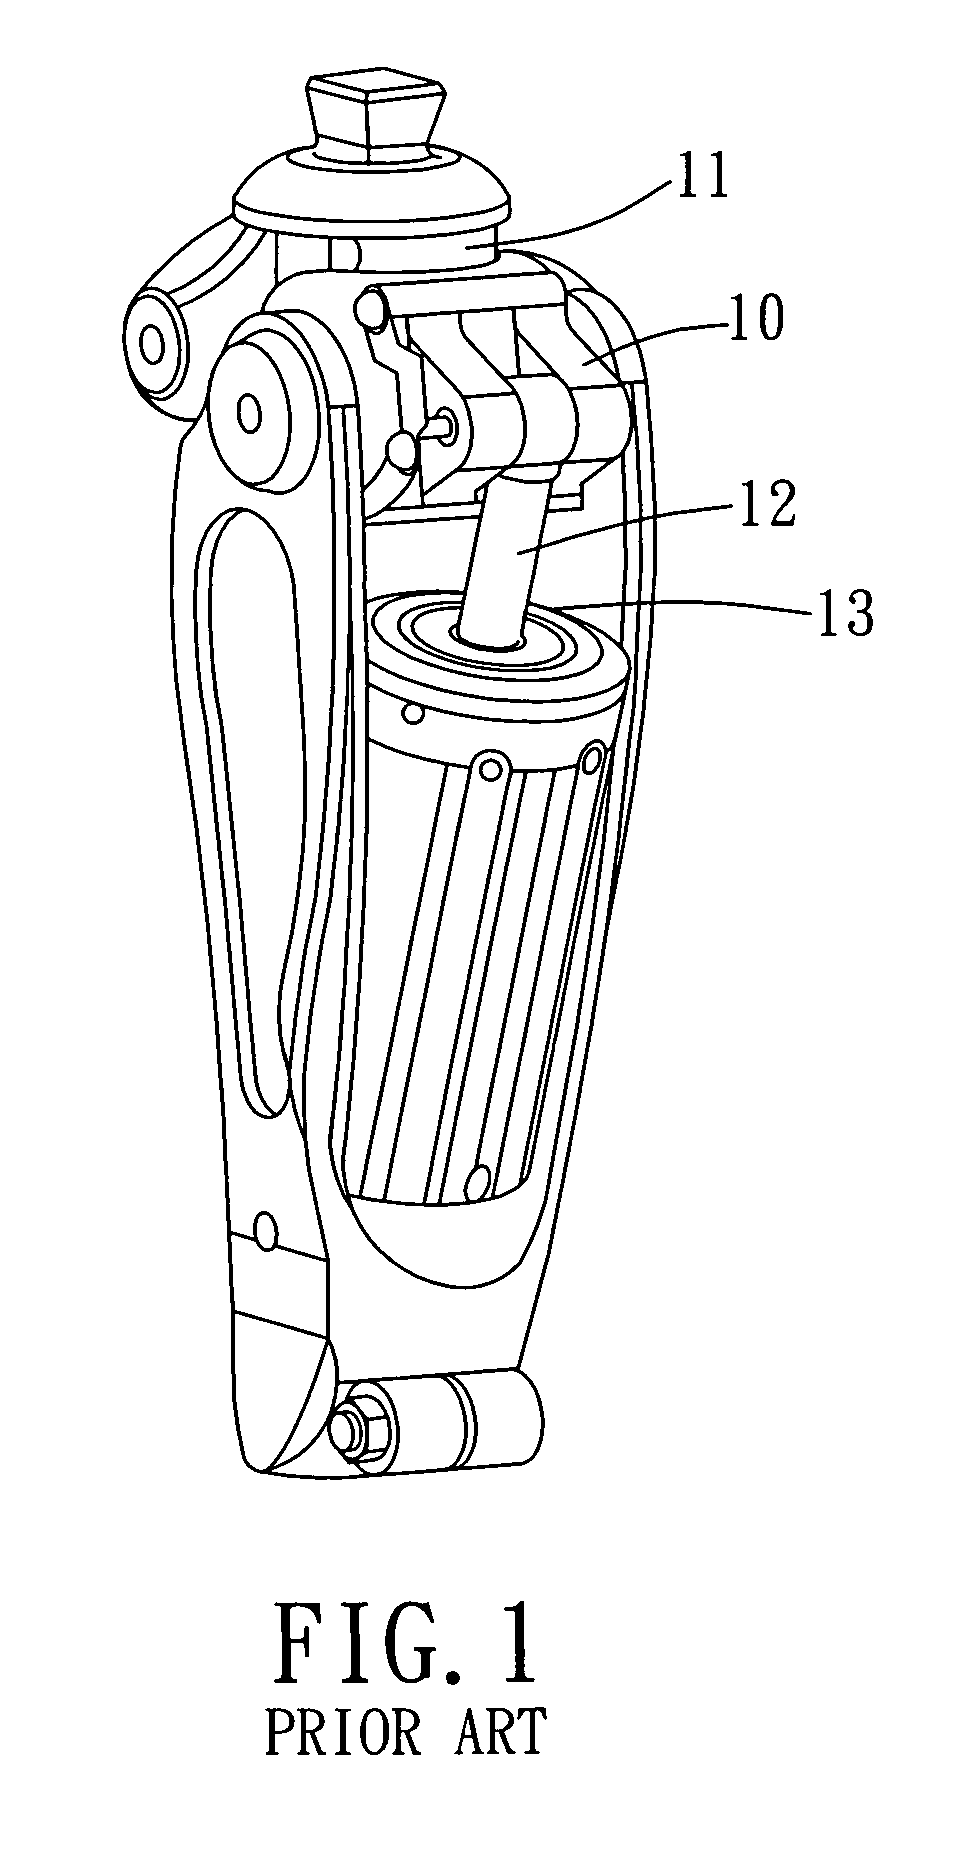 Artificial knee joint having a minimum knee angle